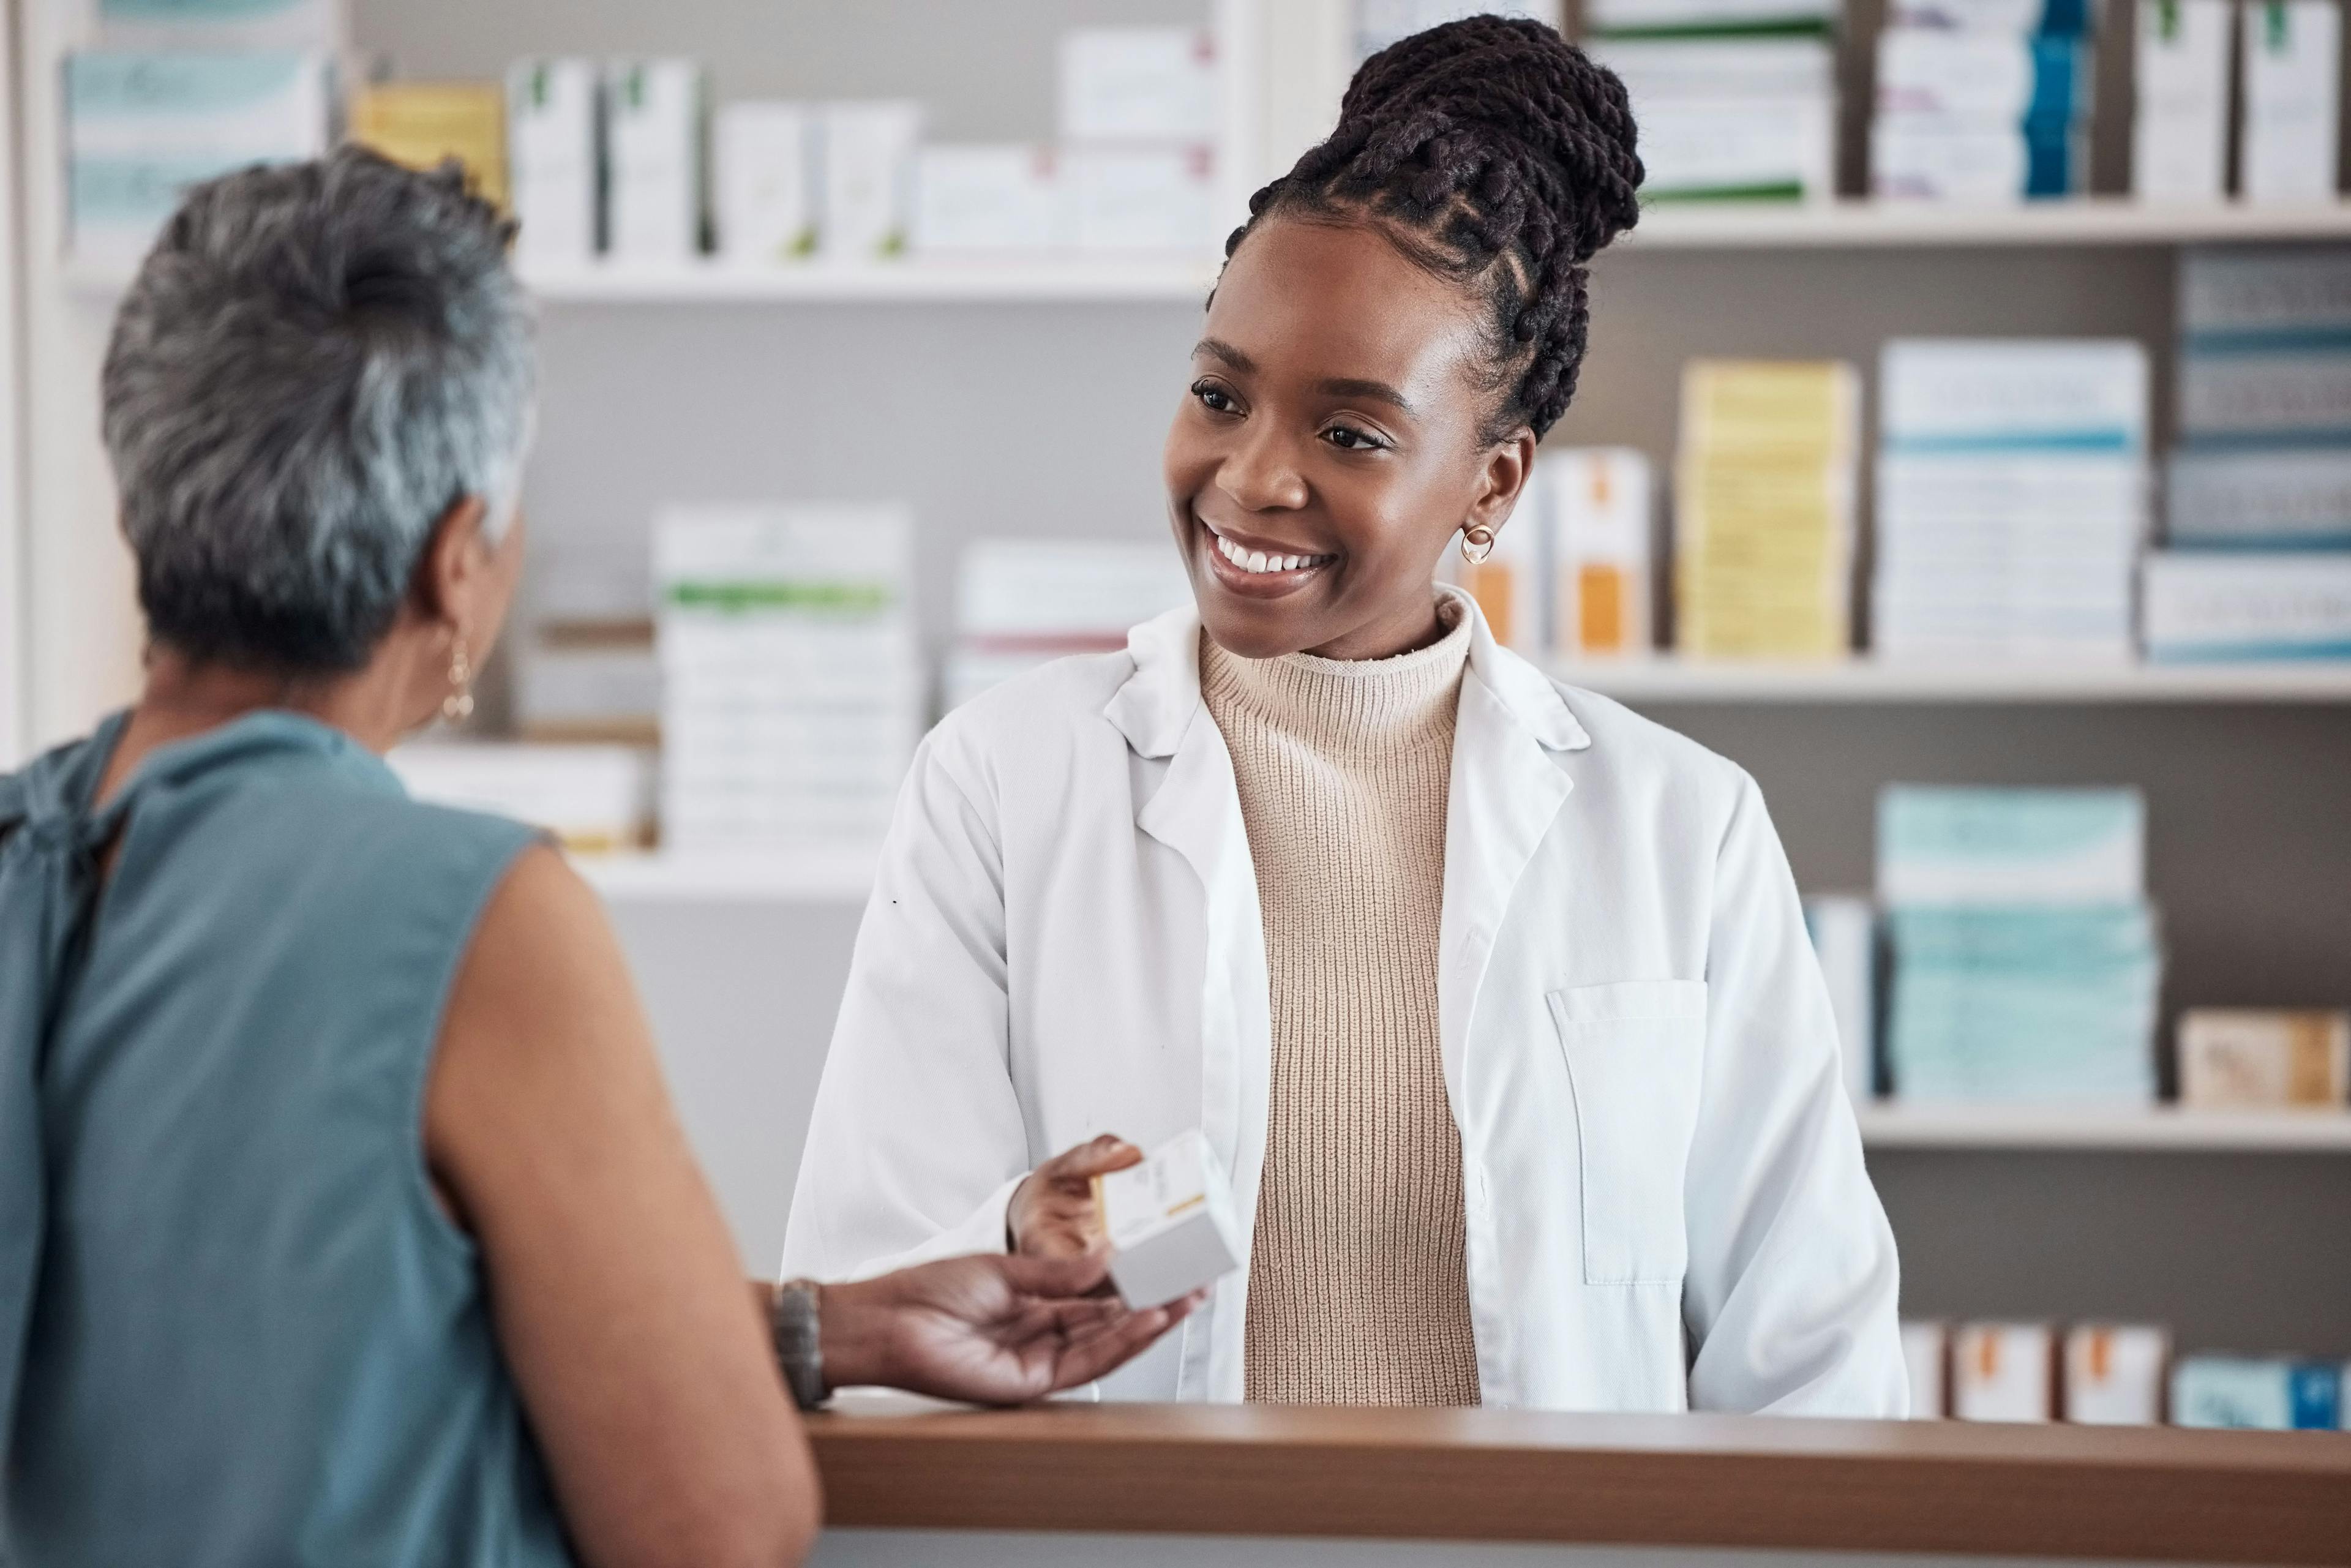 Pharmacies Can Use These Marketing Tips to Attract Customers in the New Year